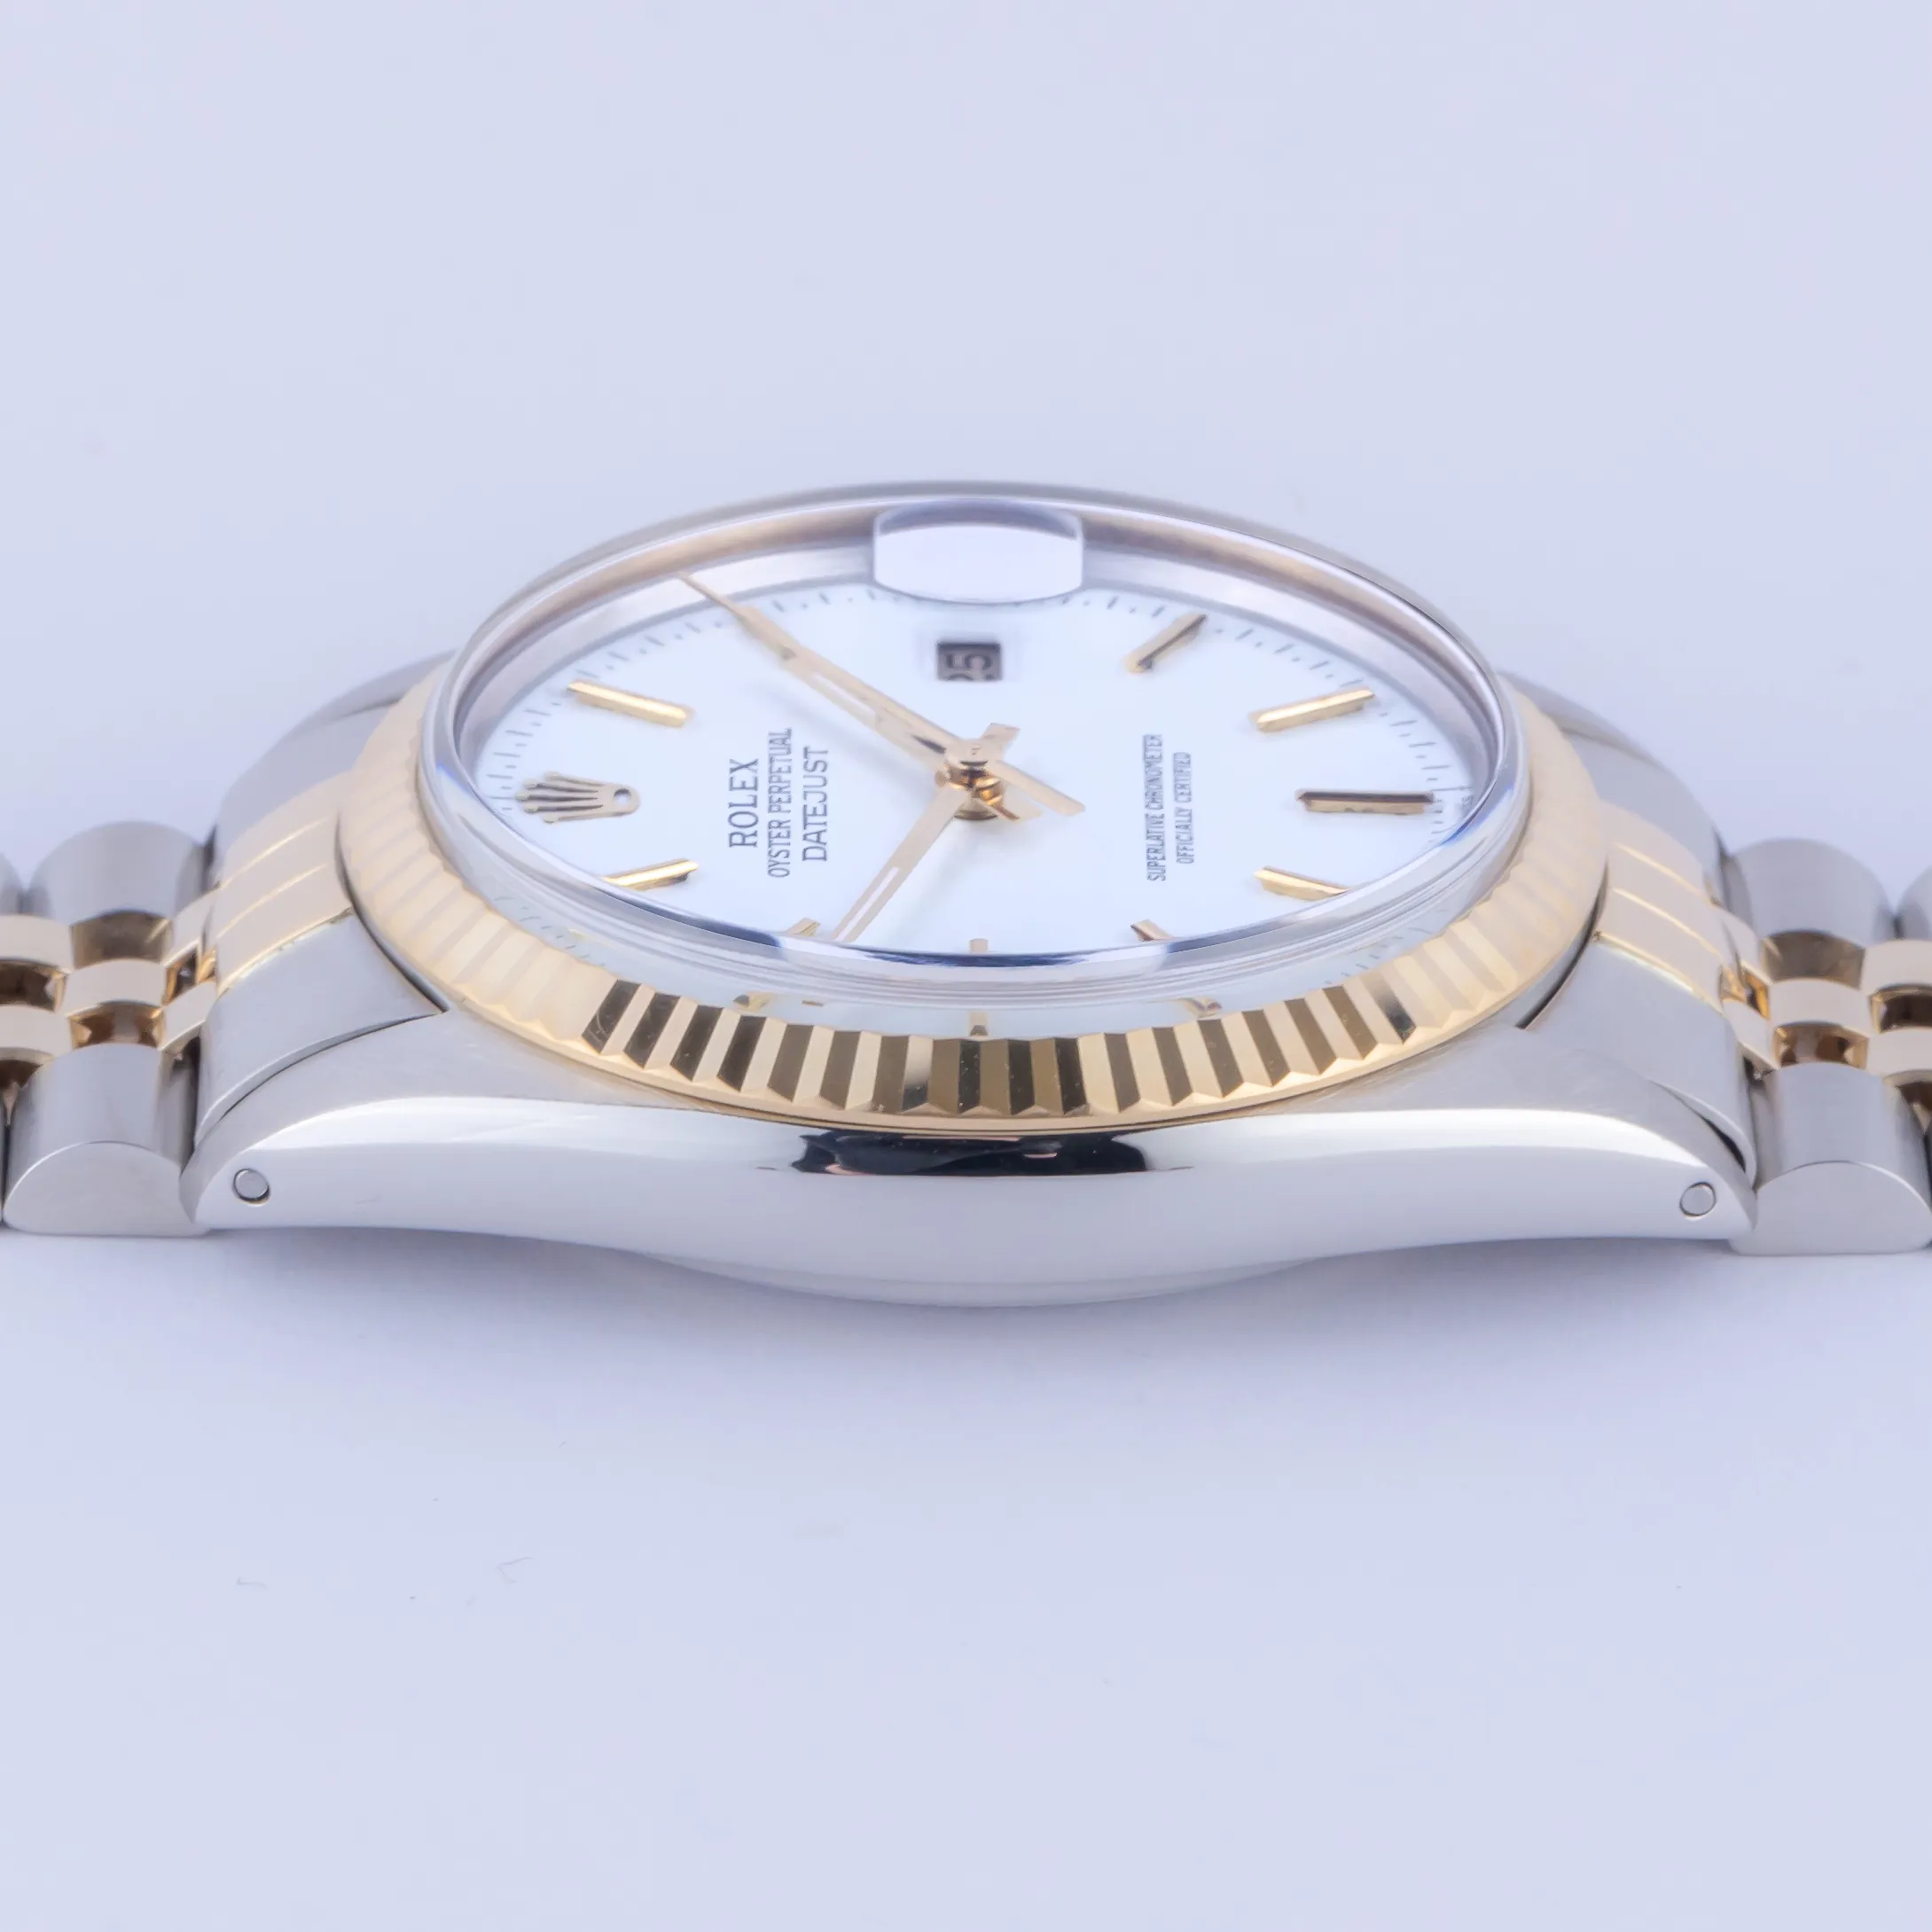 Rolex Oyster Perpetual "Datejust" 16013 36mm Yellow gold and stainless steel White 4